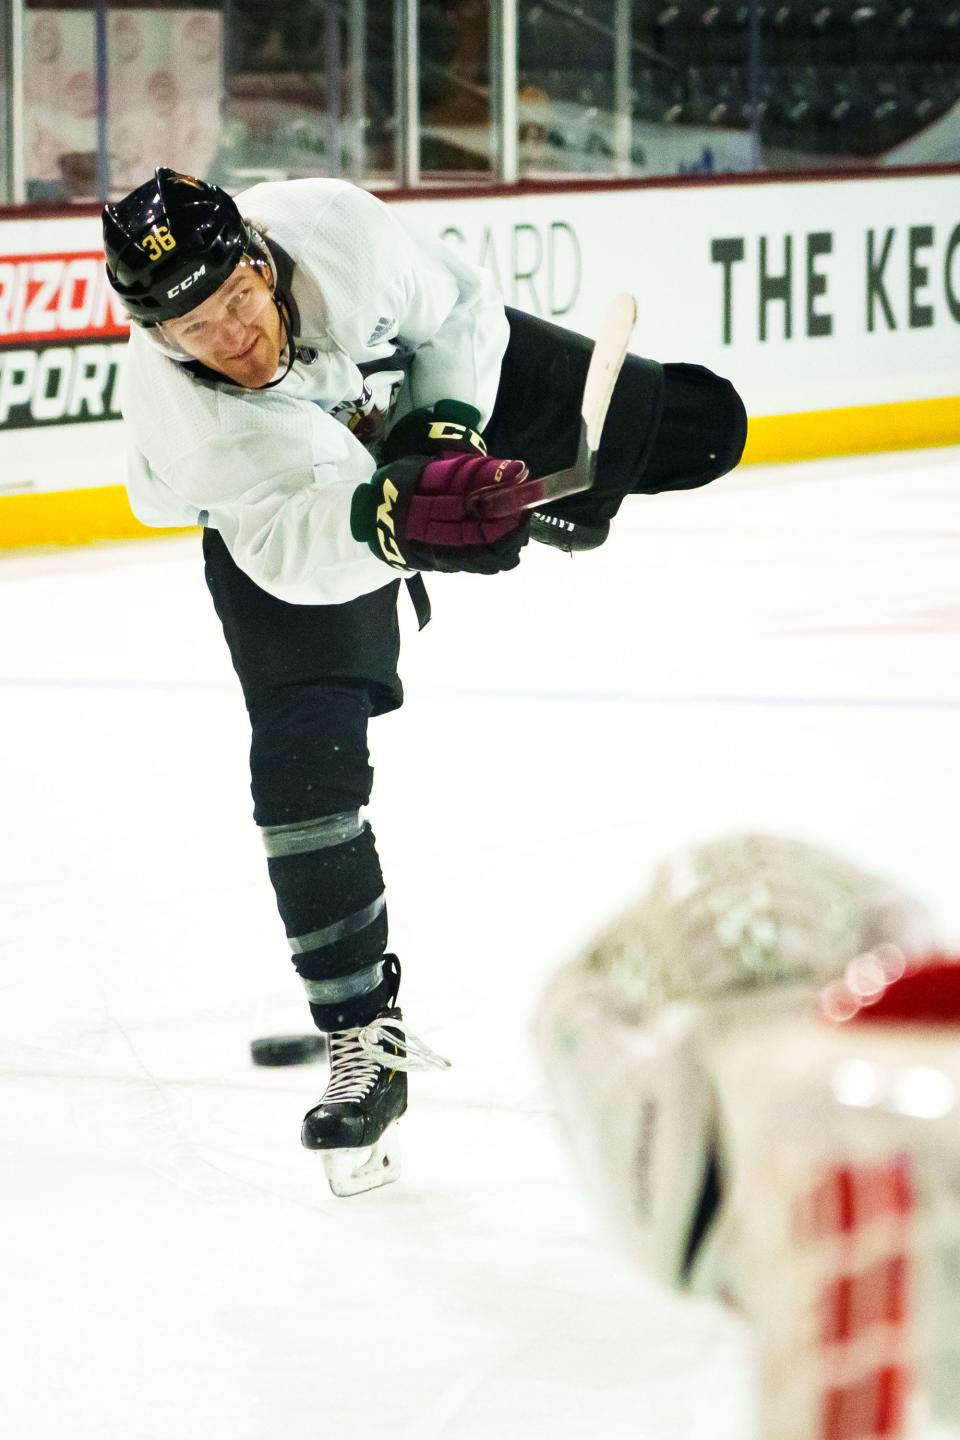 Christian Fischer (36) takes a shot during the Coyotes' practice at Mullett Arena on Oct. 27, 2022.